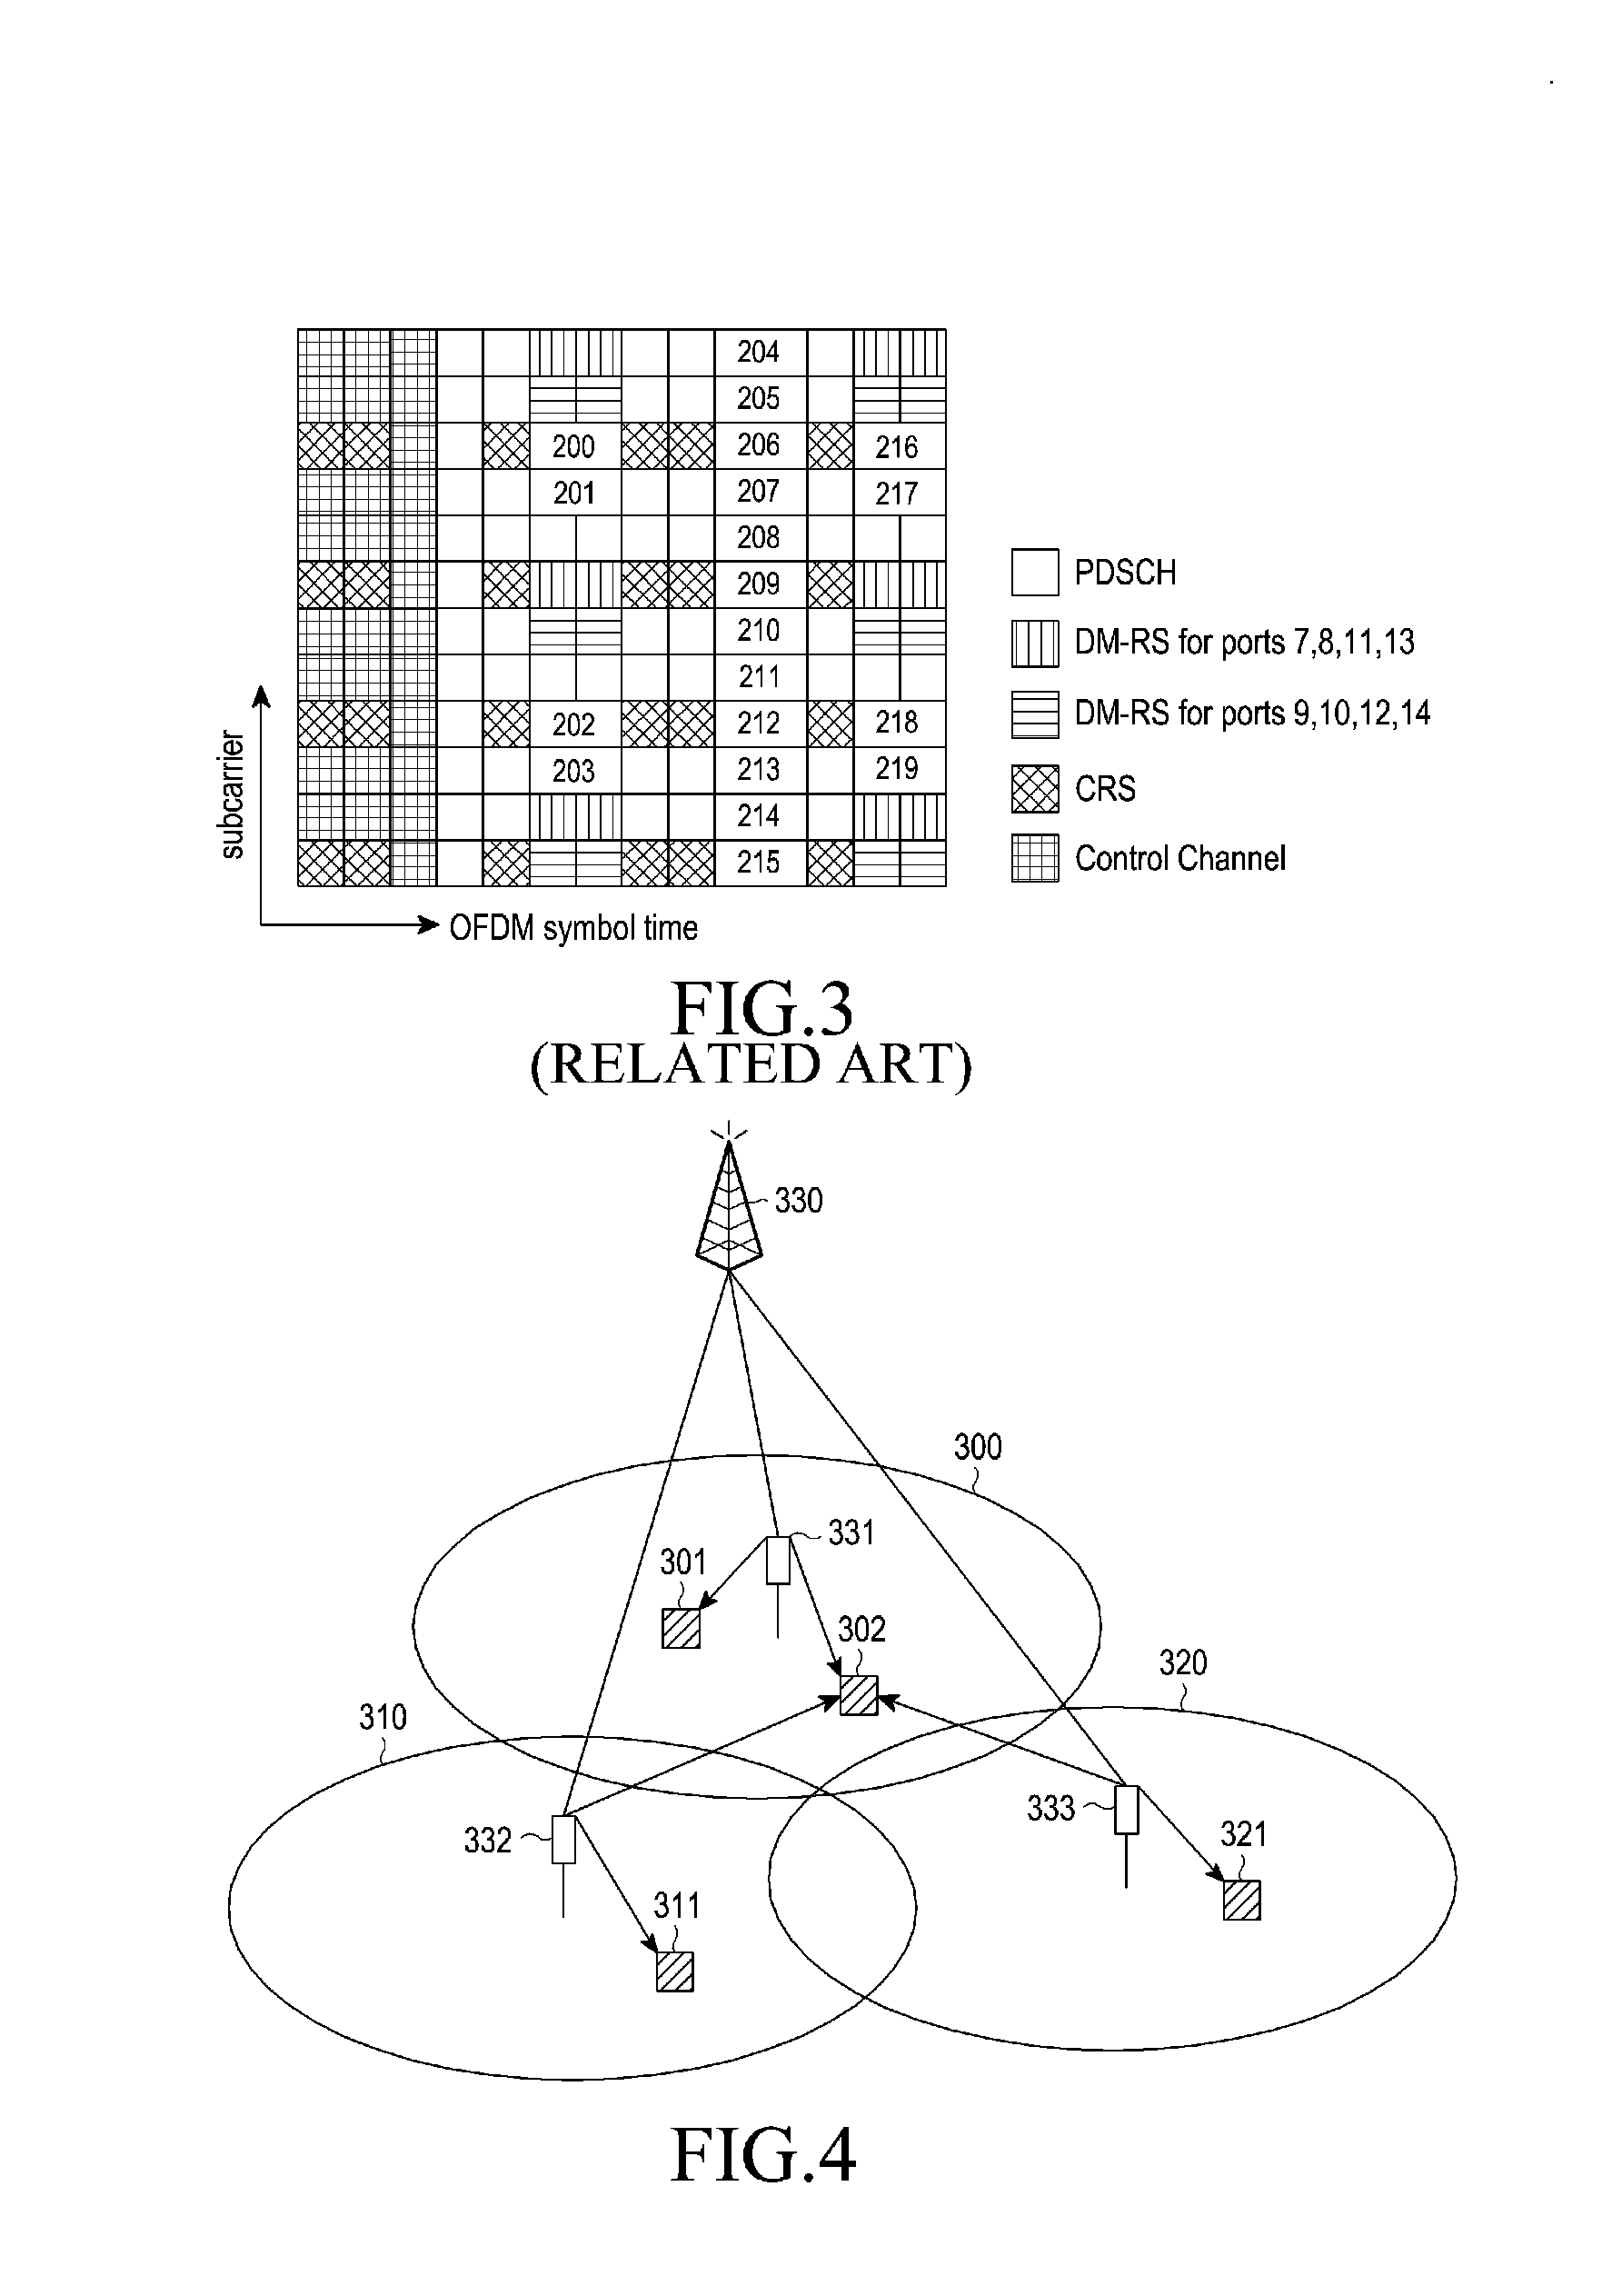 Apparatus and method for transmitting/receiving downlink data channel signal transmission information in cellular radio communication system using cooperative multi-point scheme